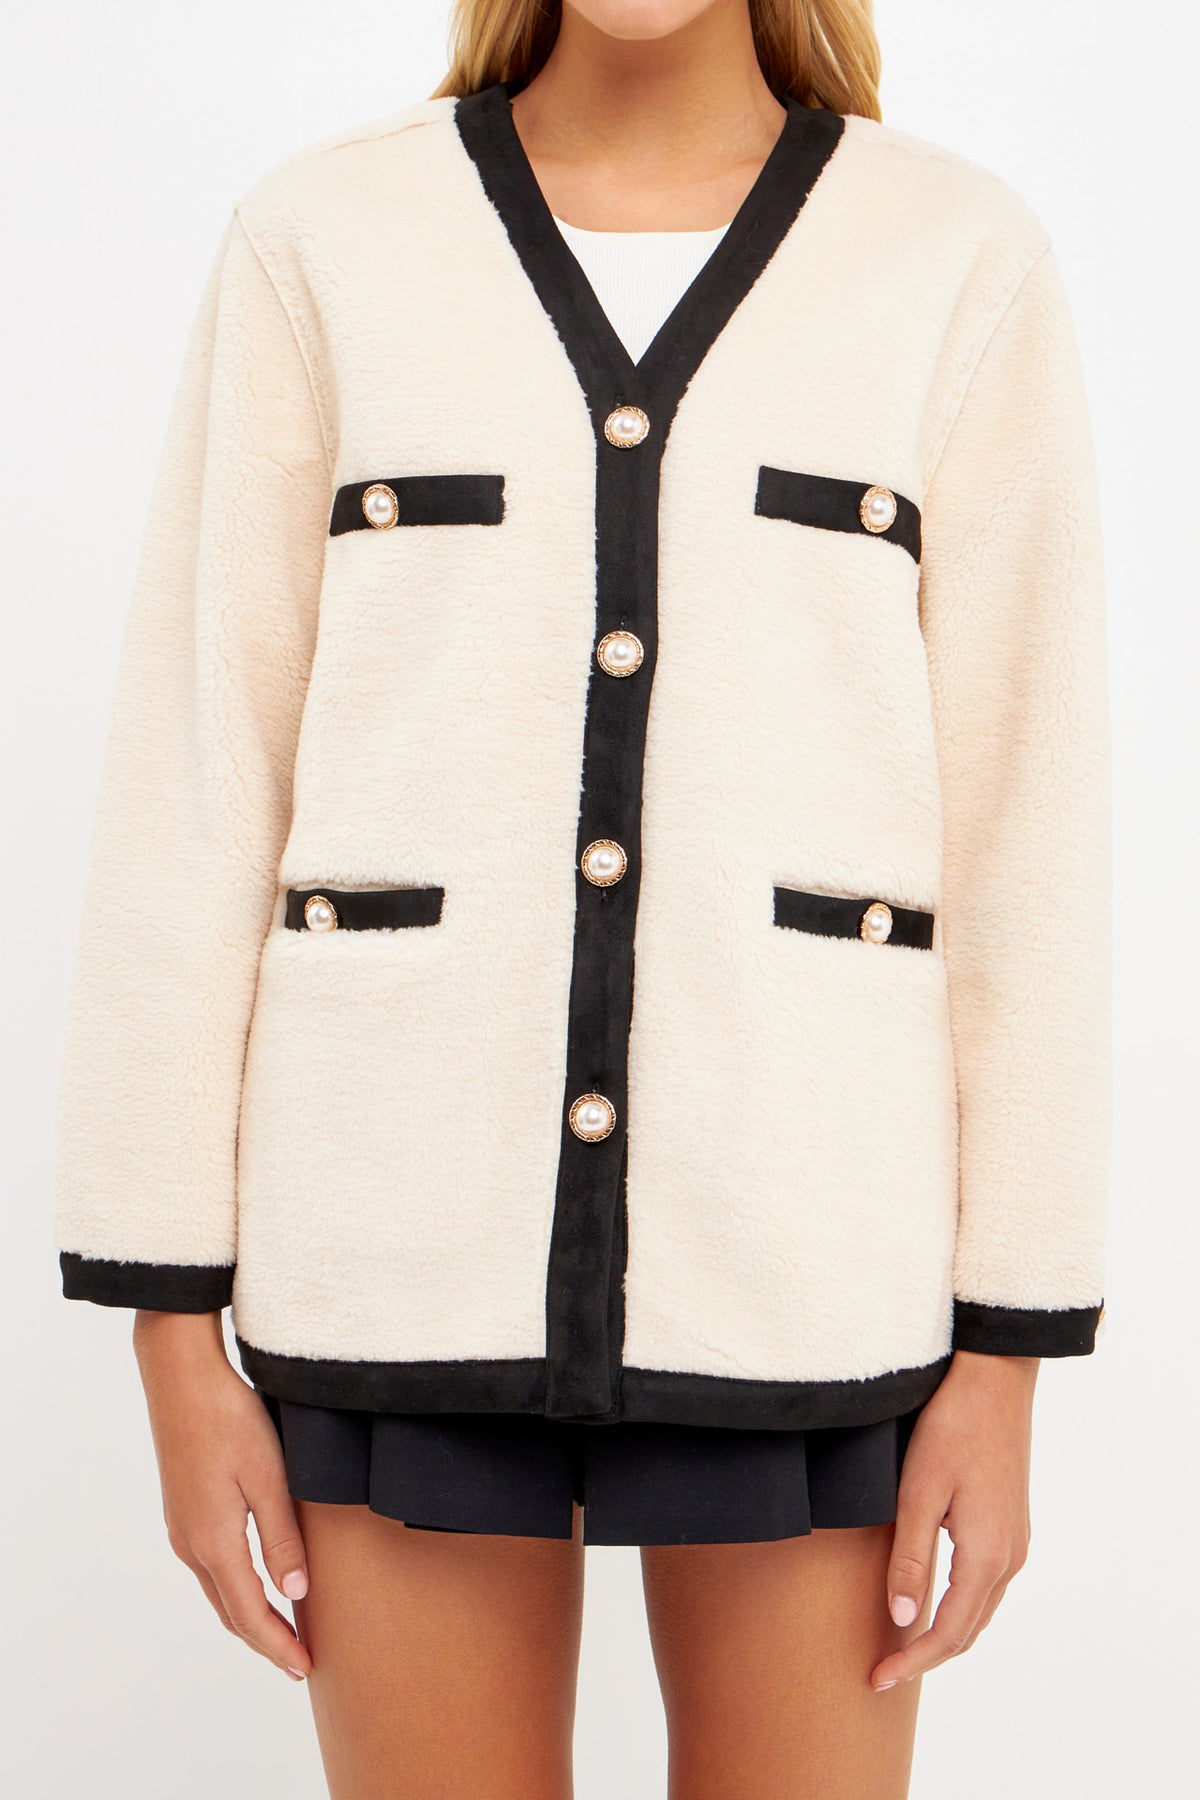 ENGLISH FACTORY - Shearing Jacket with Buttons - JACKETS available at Objectrare